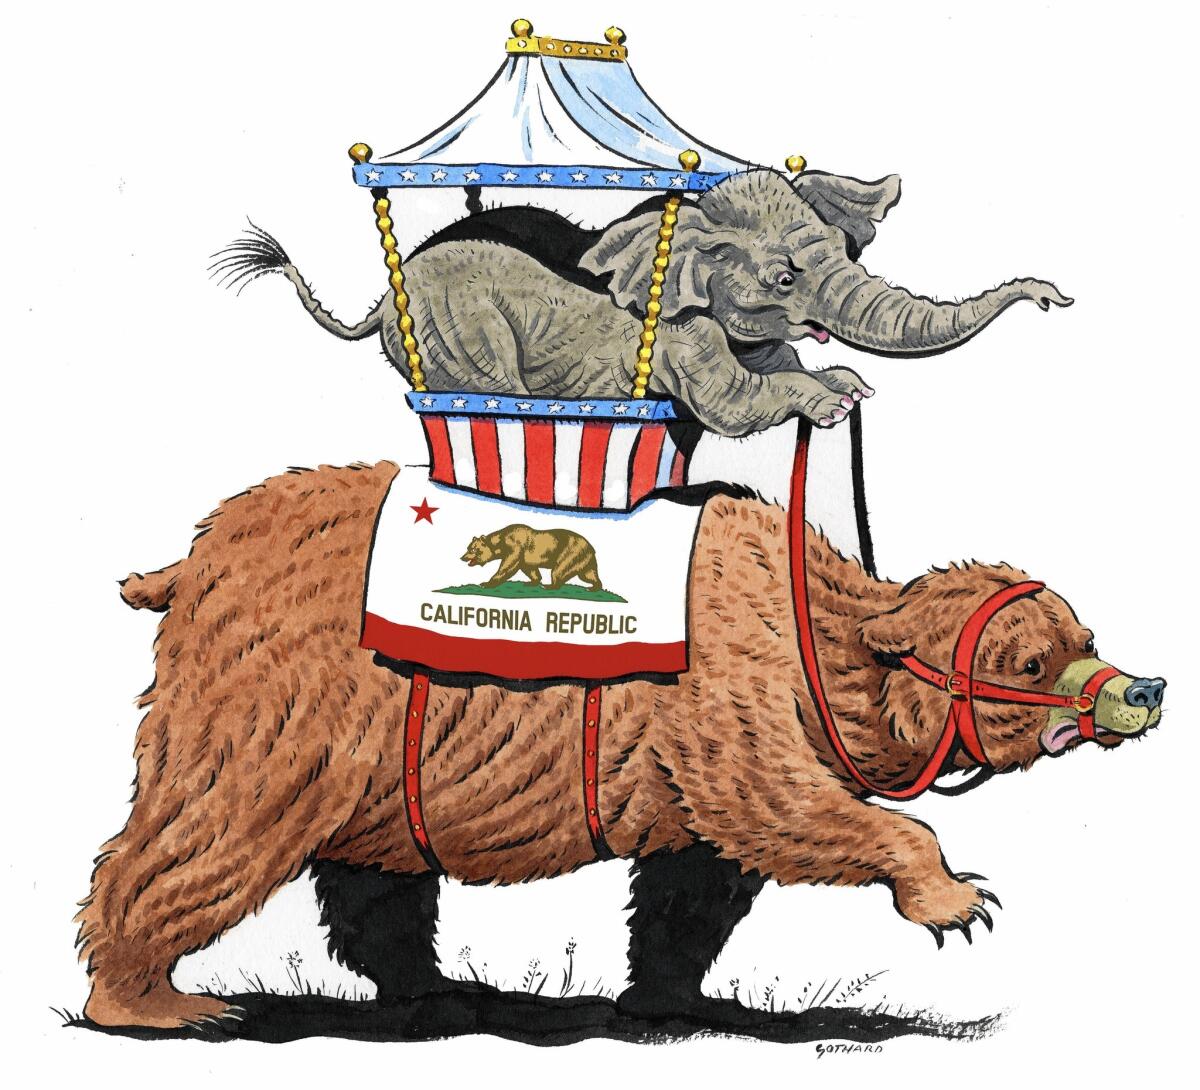 la-oe-0103-gothard /// Illustration by David Gothard / For The Times. To run with Kathryn S. Olmsted's piece about California roots of the national Republican party.